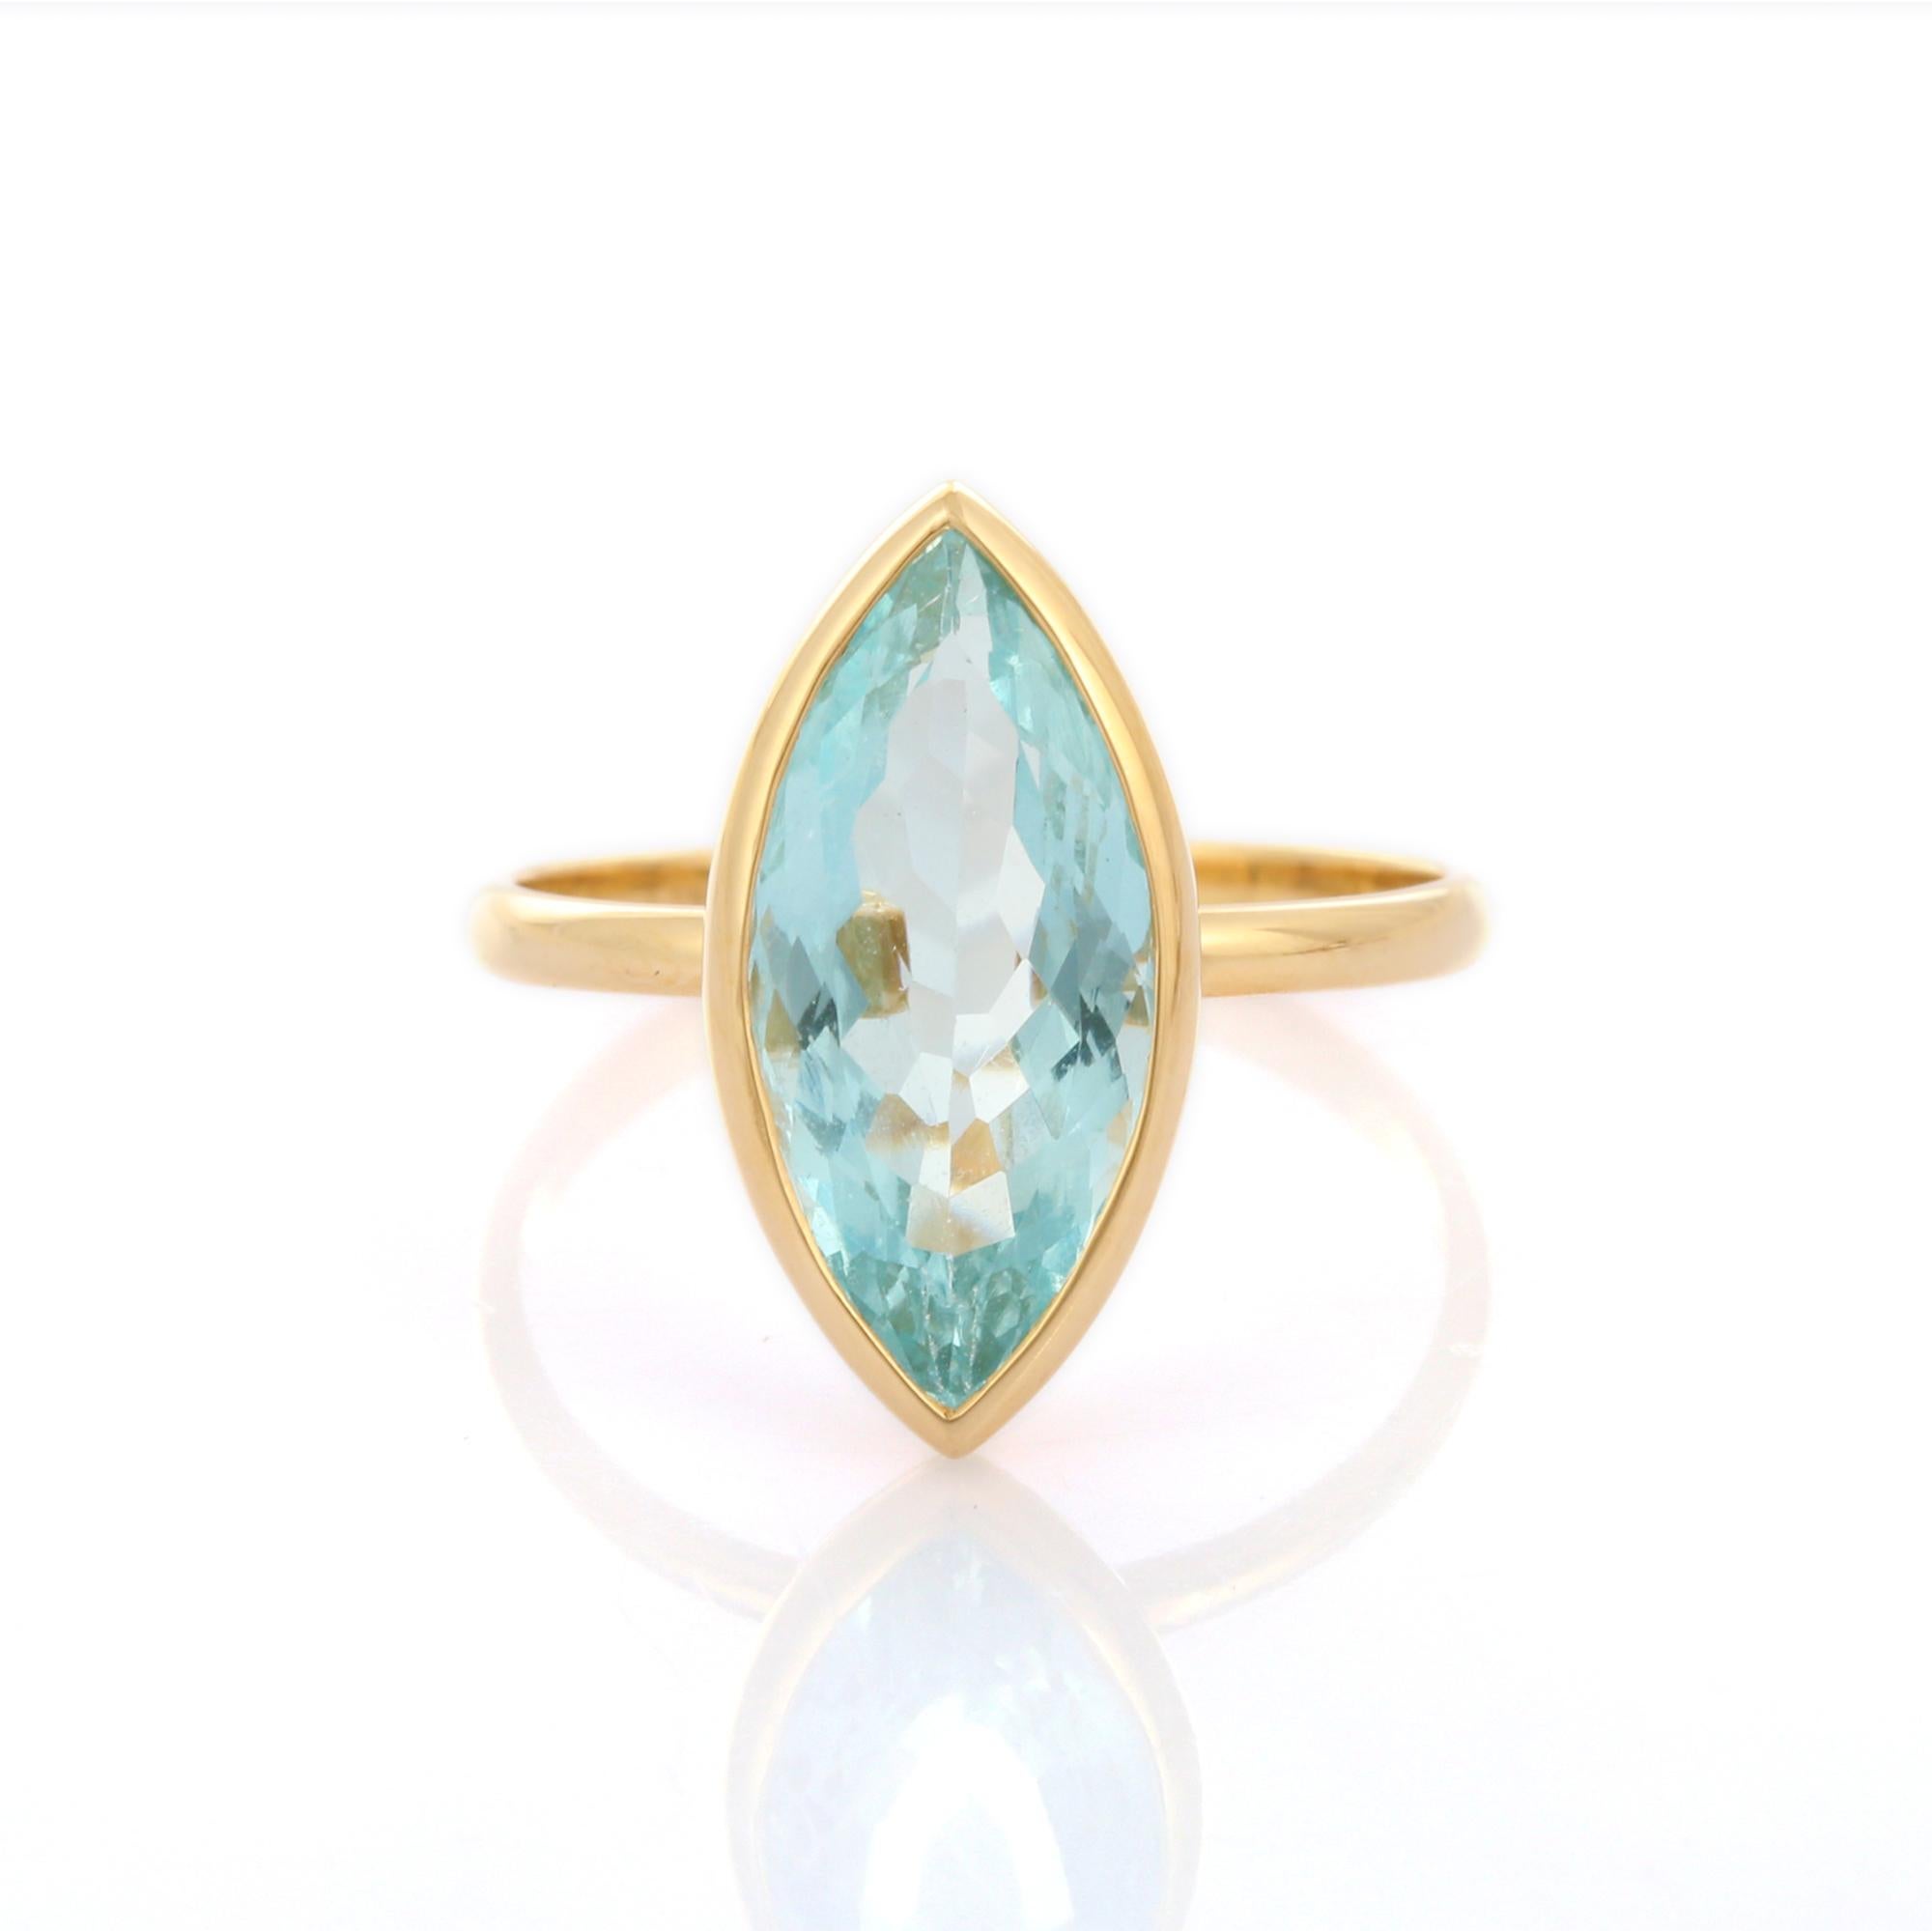 For Sale:  Marquise Cut Aquamarine Cocktail Ring in 18K Yellow Gold  13